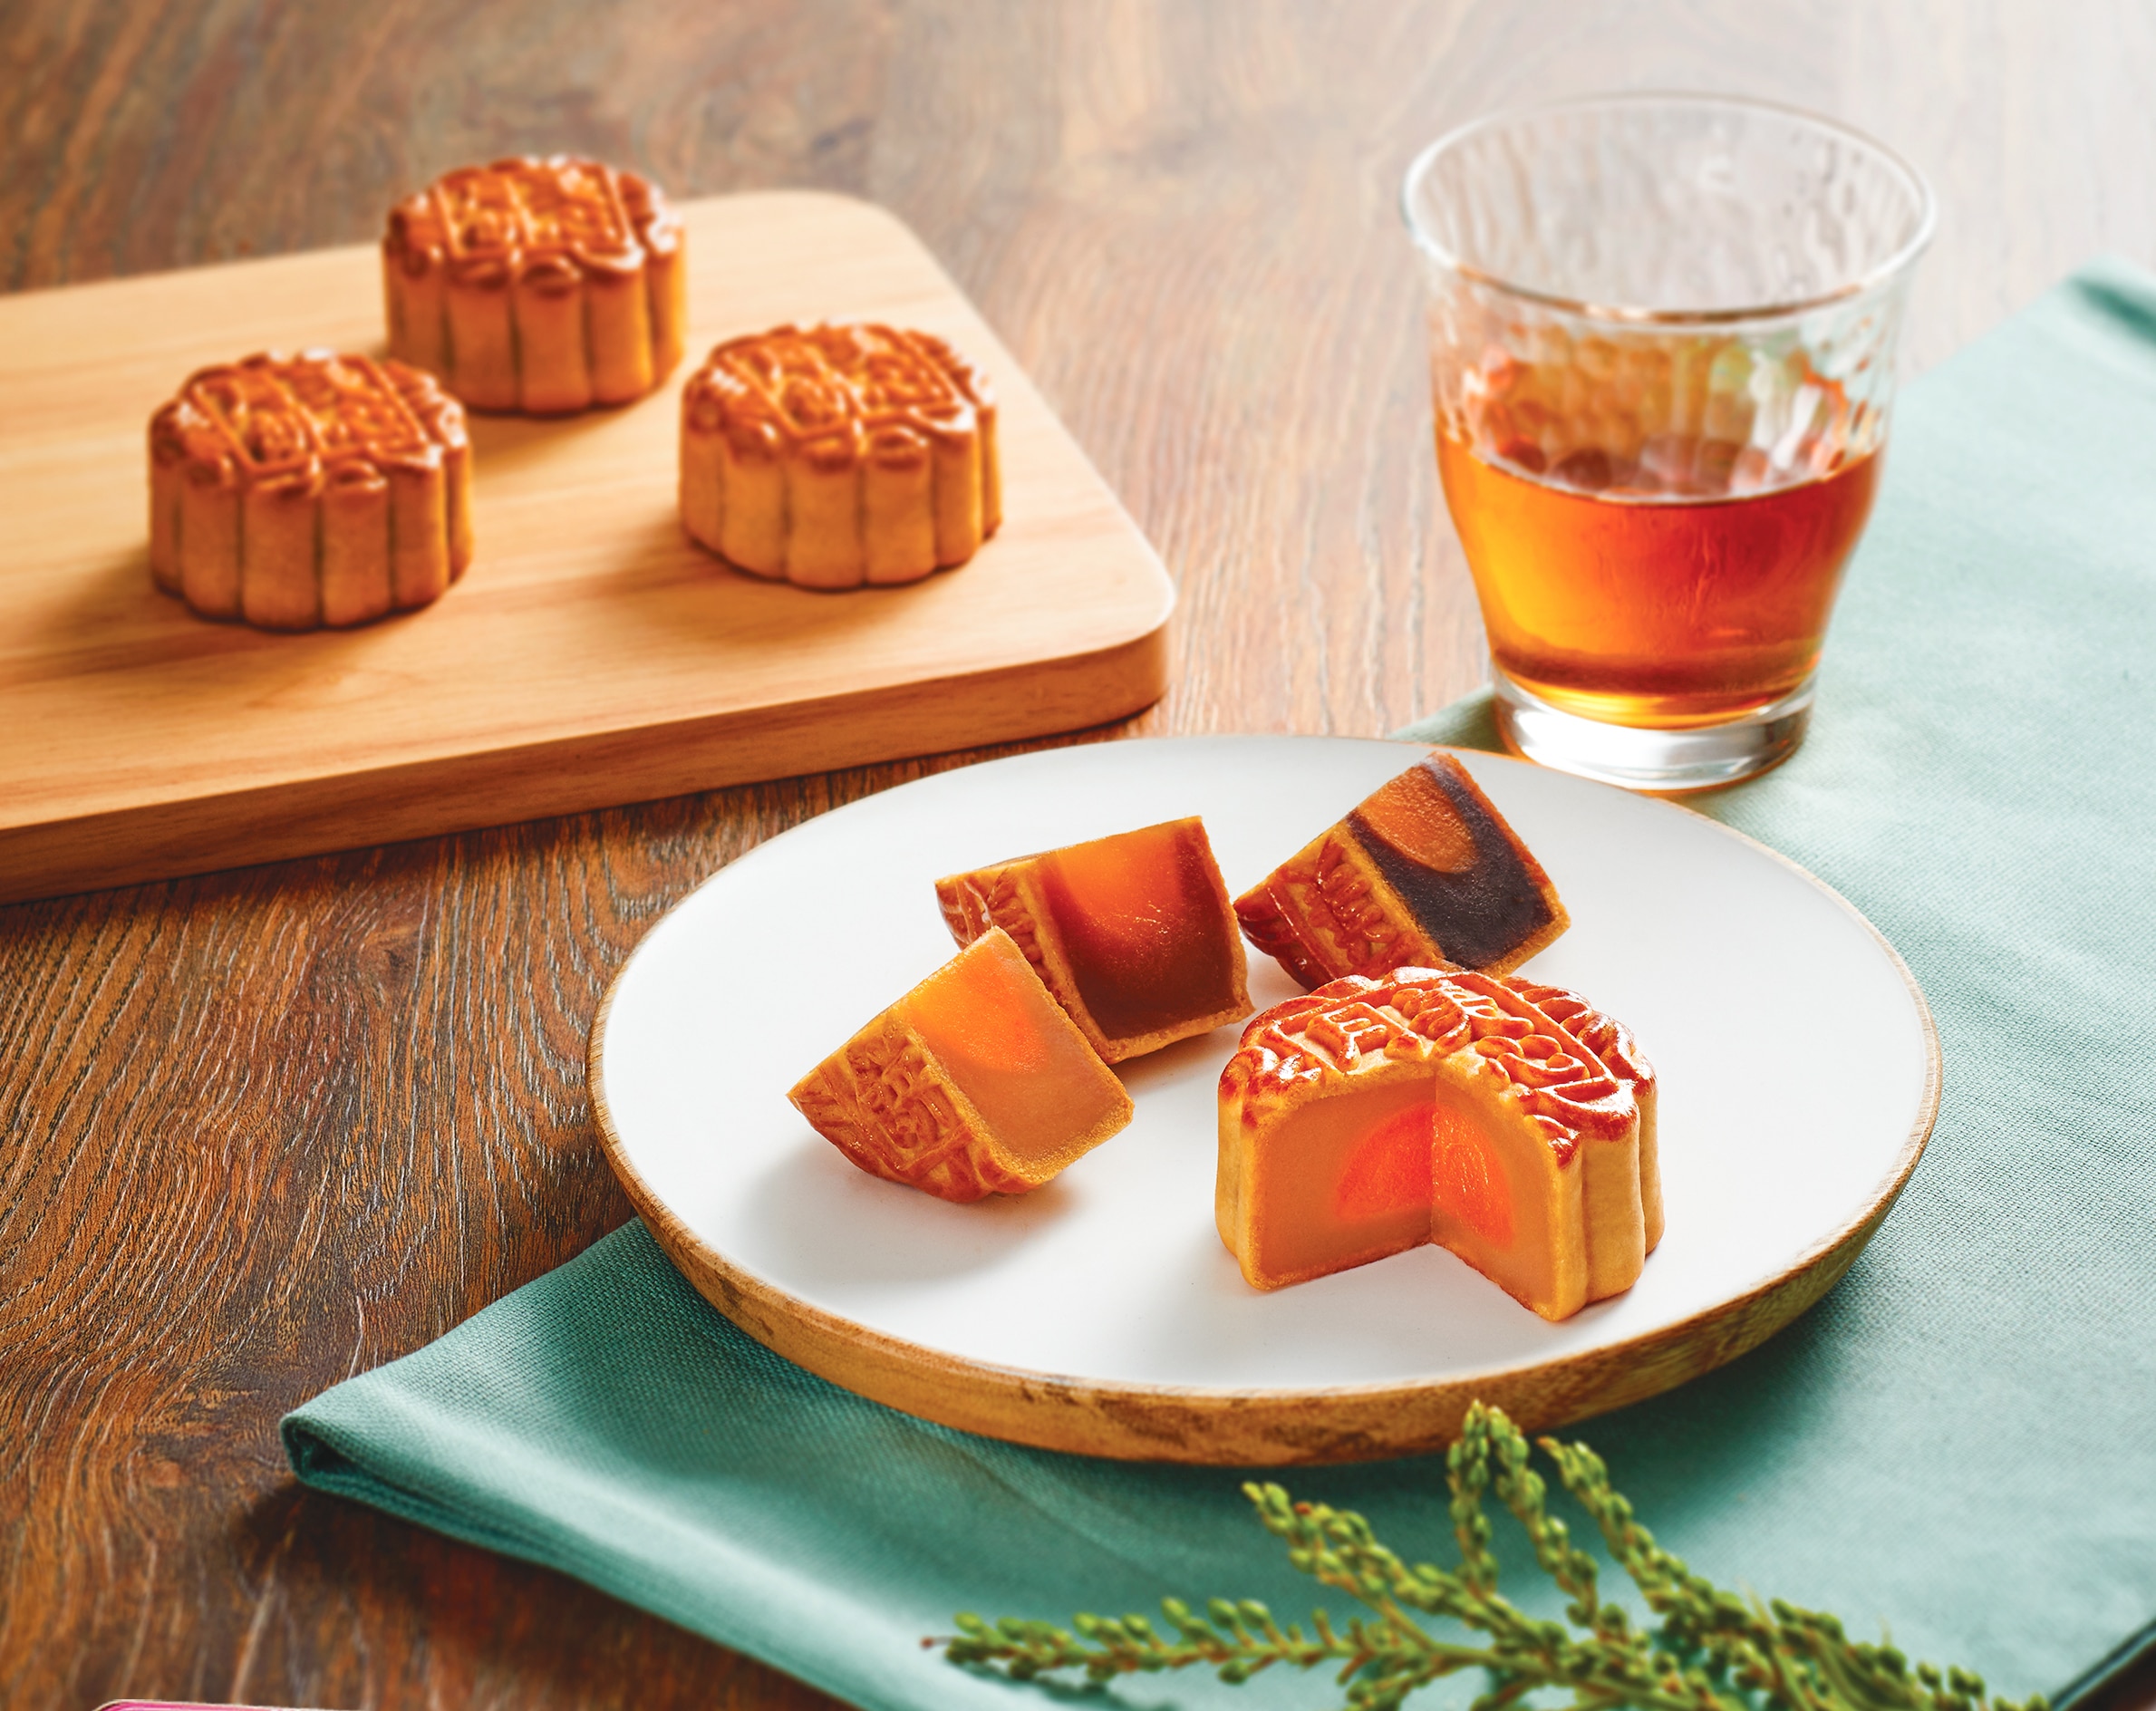 Hong Kong’s MX Mooncake opens pop-up stores for Mid-Autumn Festival 2